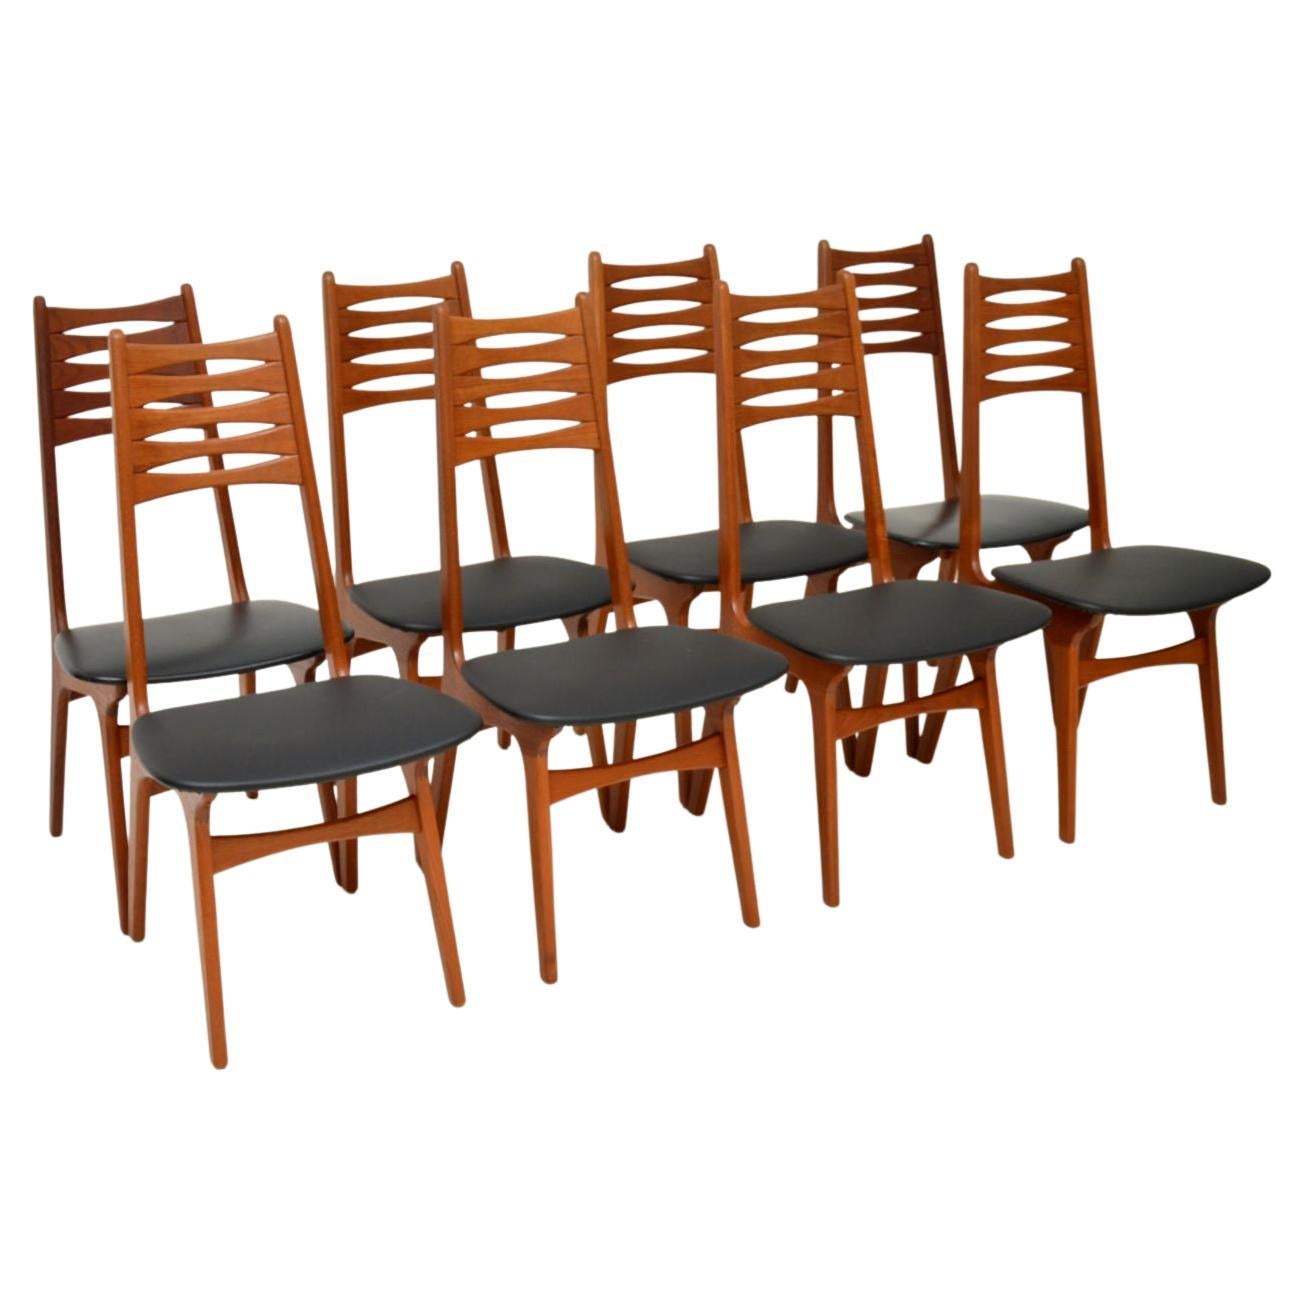 1960s Set of 8 Danish Teak Vintage Dining Chairs For Sale